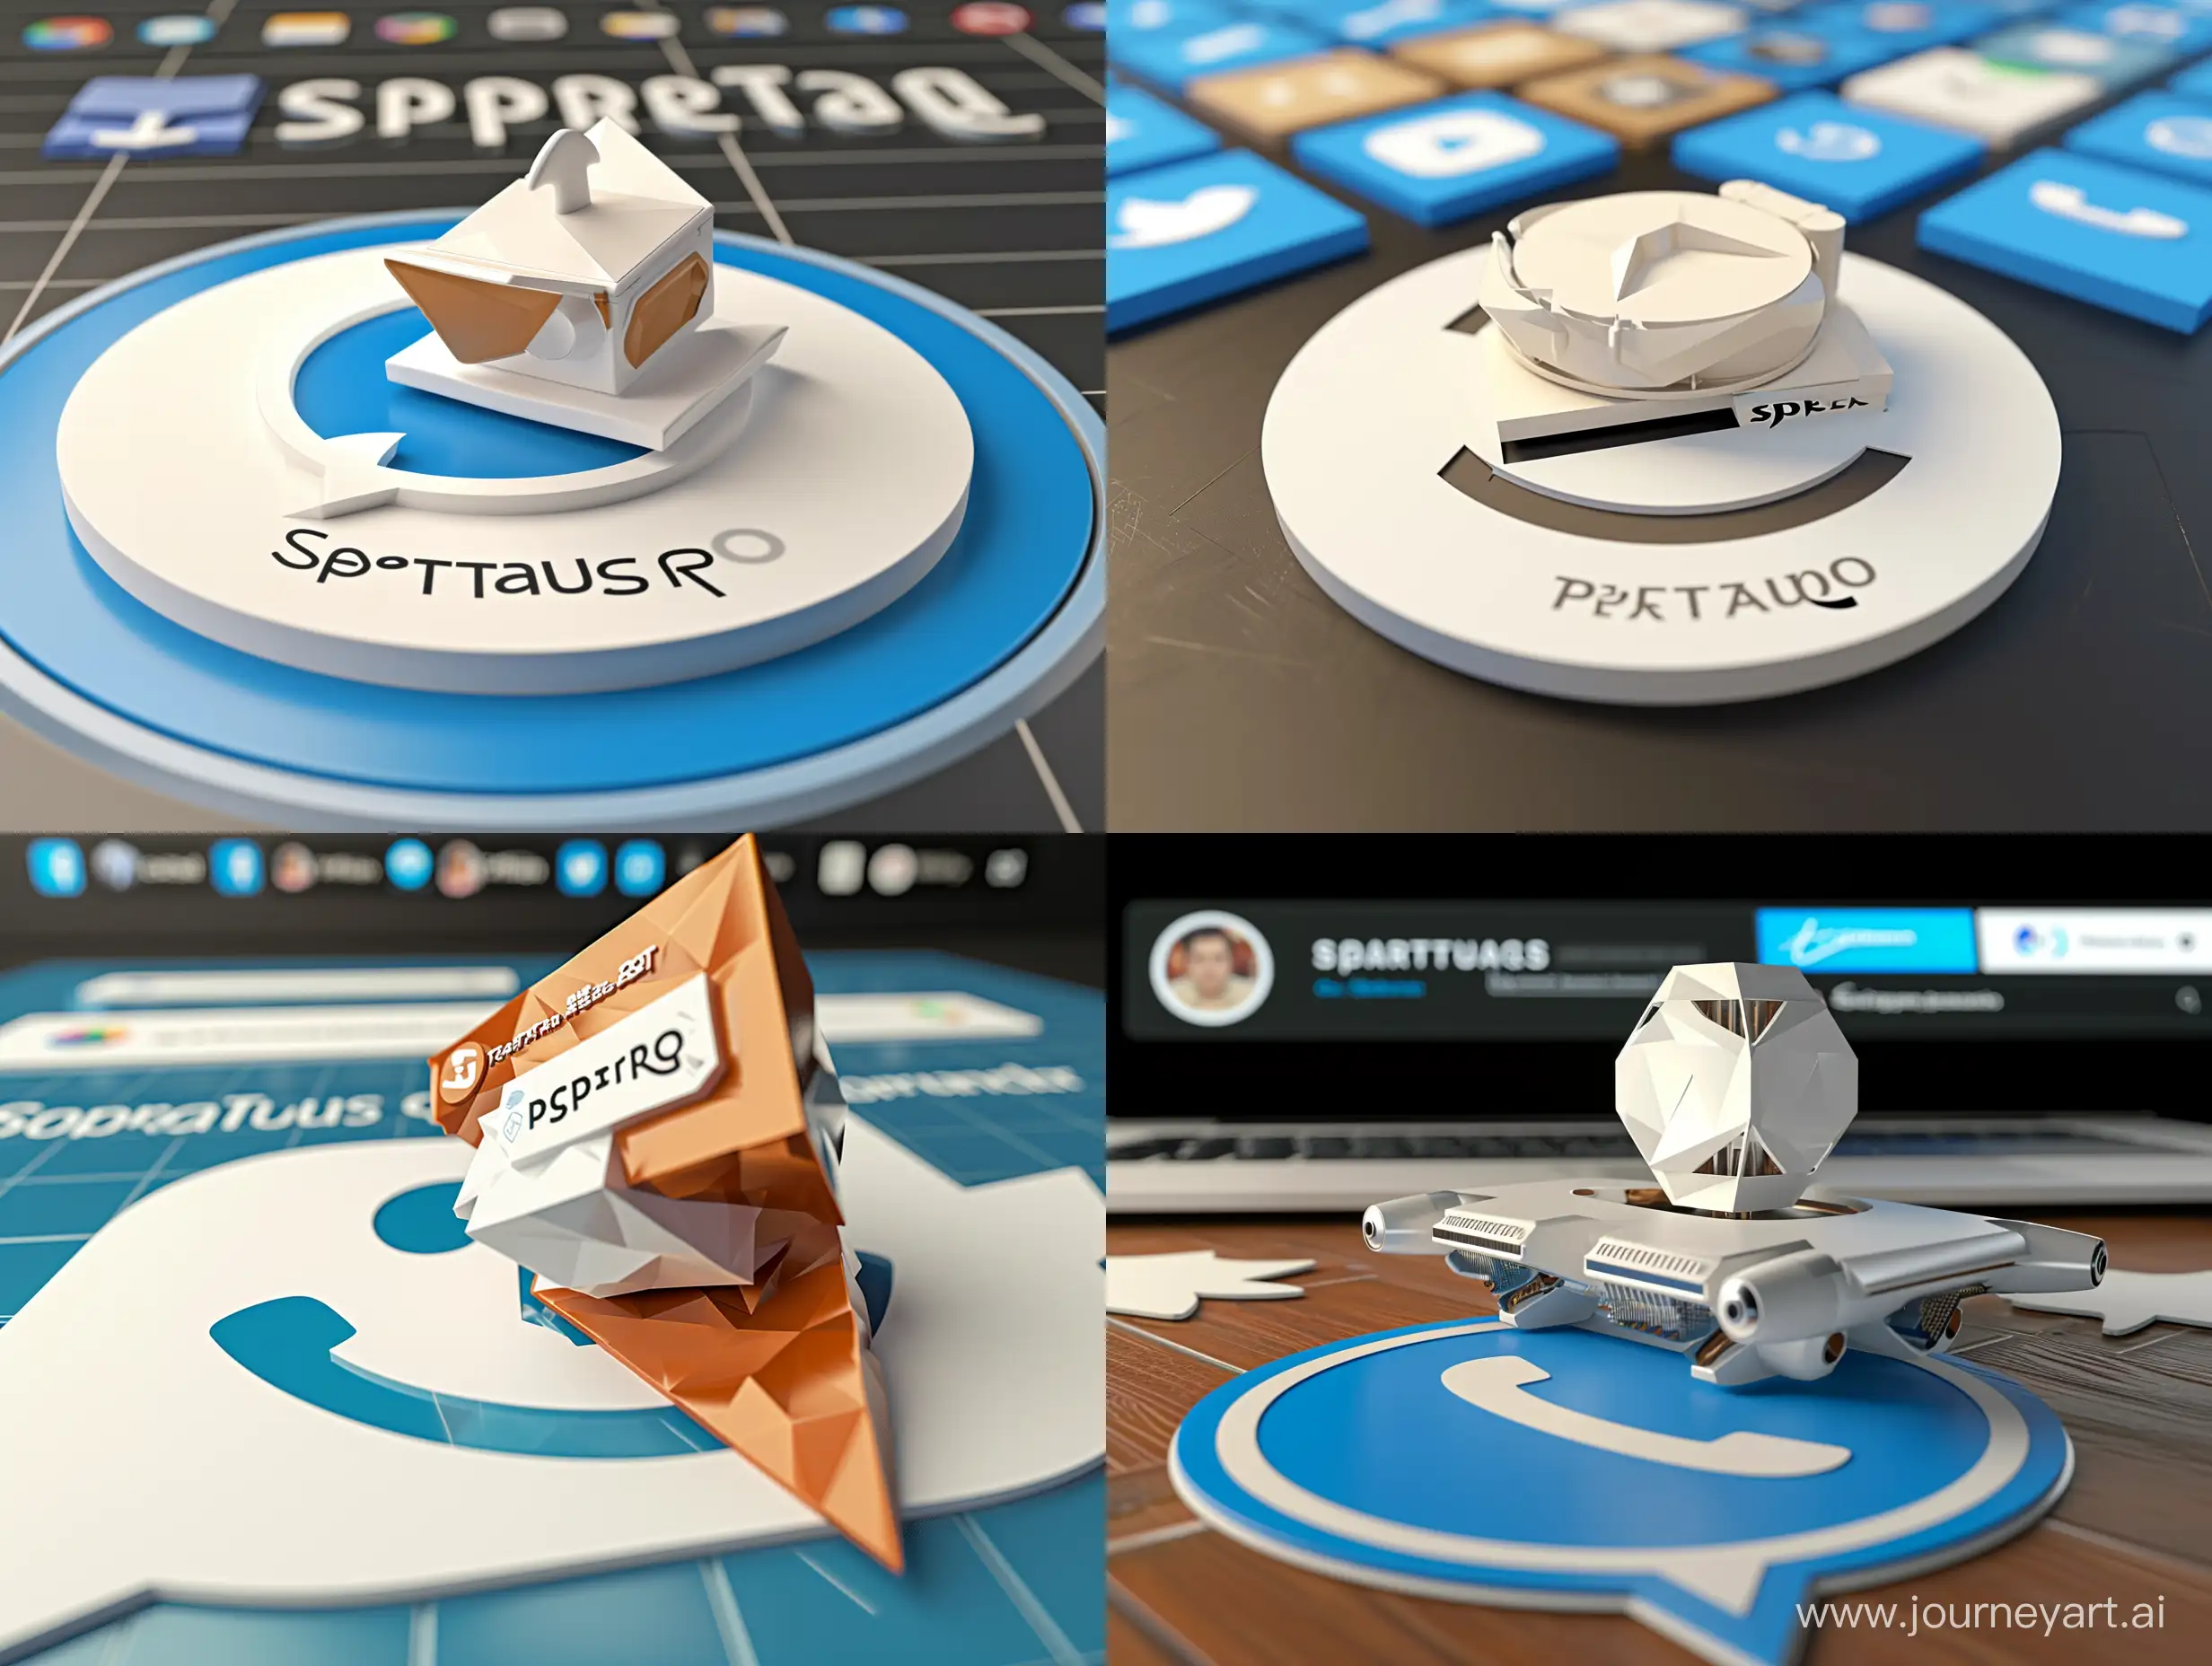 Create a 3D image of a beautiful logo that sits on top of the Telegram social network logo. The background image is a social media profile page with the username "SpAreTaCusRoBot" and a matching profile picture.